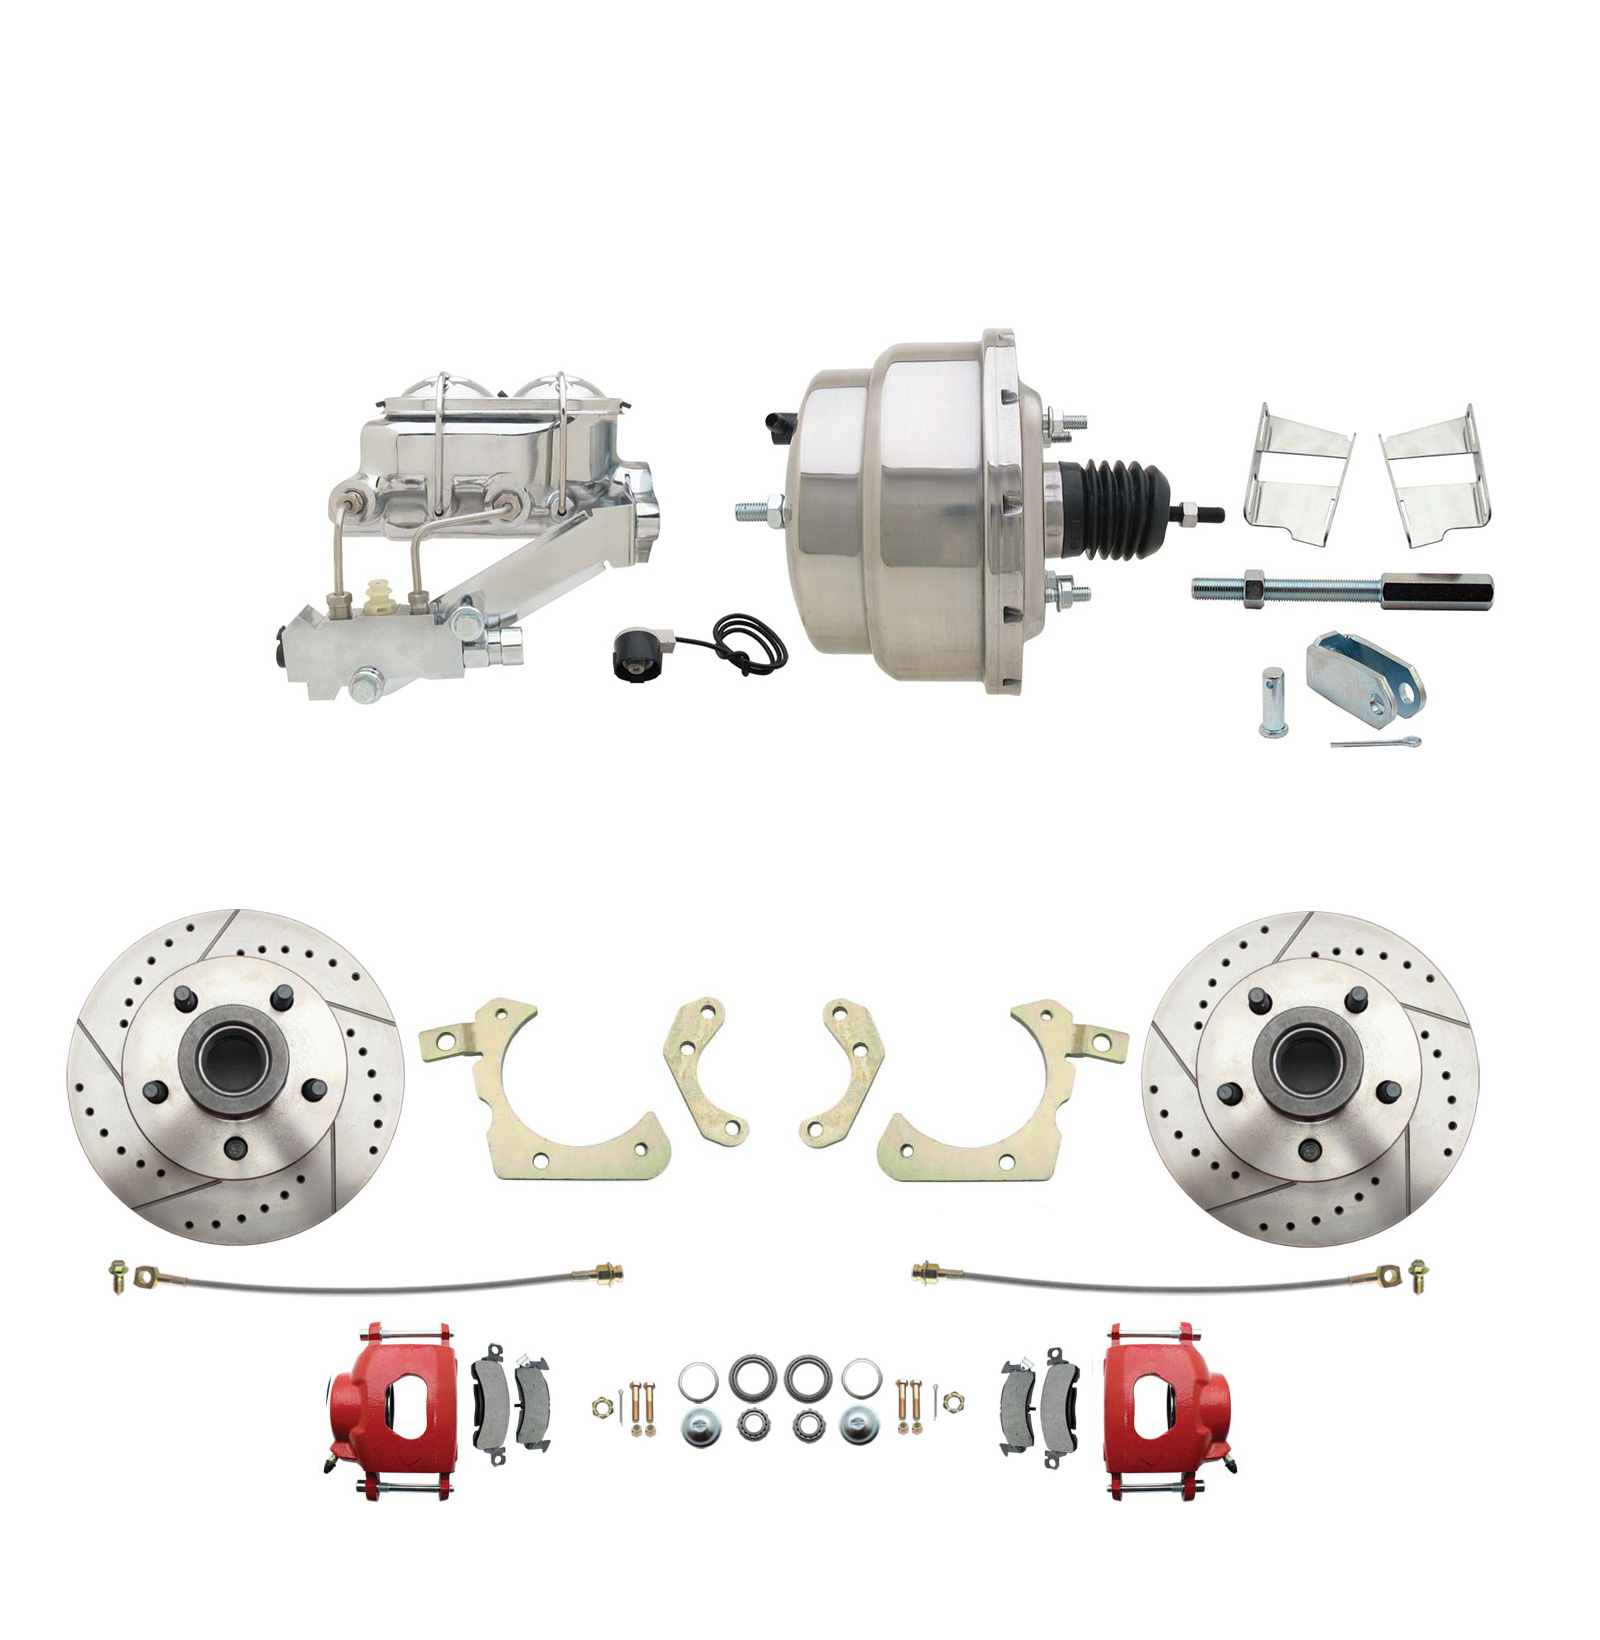 1959-1964 GM Full Size Front Disc Brake Kit Red Powder Coated Calipers Drilled/Slotted Rotors (Impala, Bel Air, Biscayne) & 8 Dual Stainless Steel Booster Conversion Kit W/ Chrome Master Cylinder Left Mount Disc/ Drum Proport